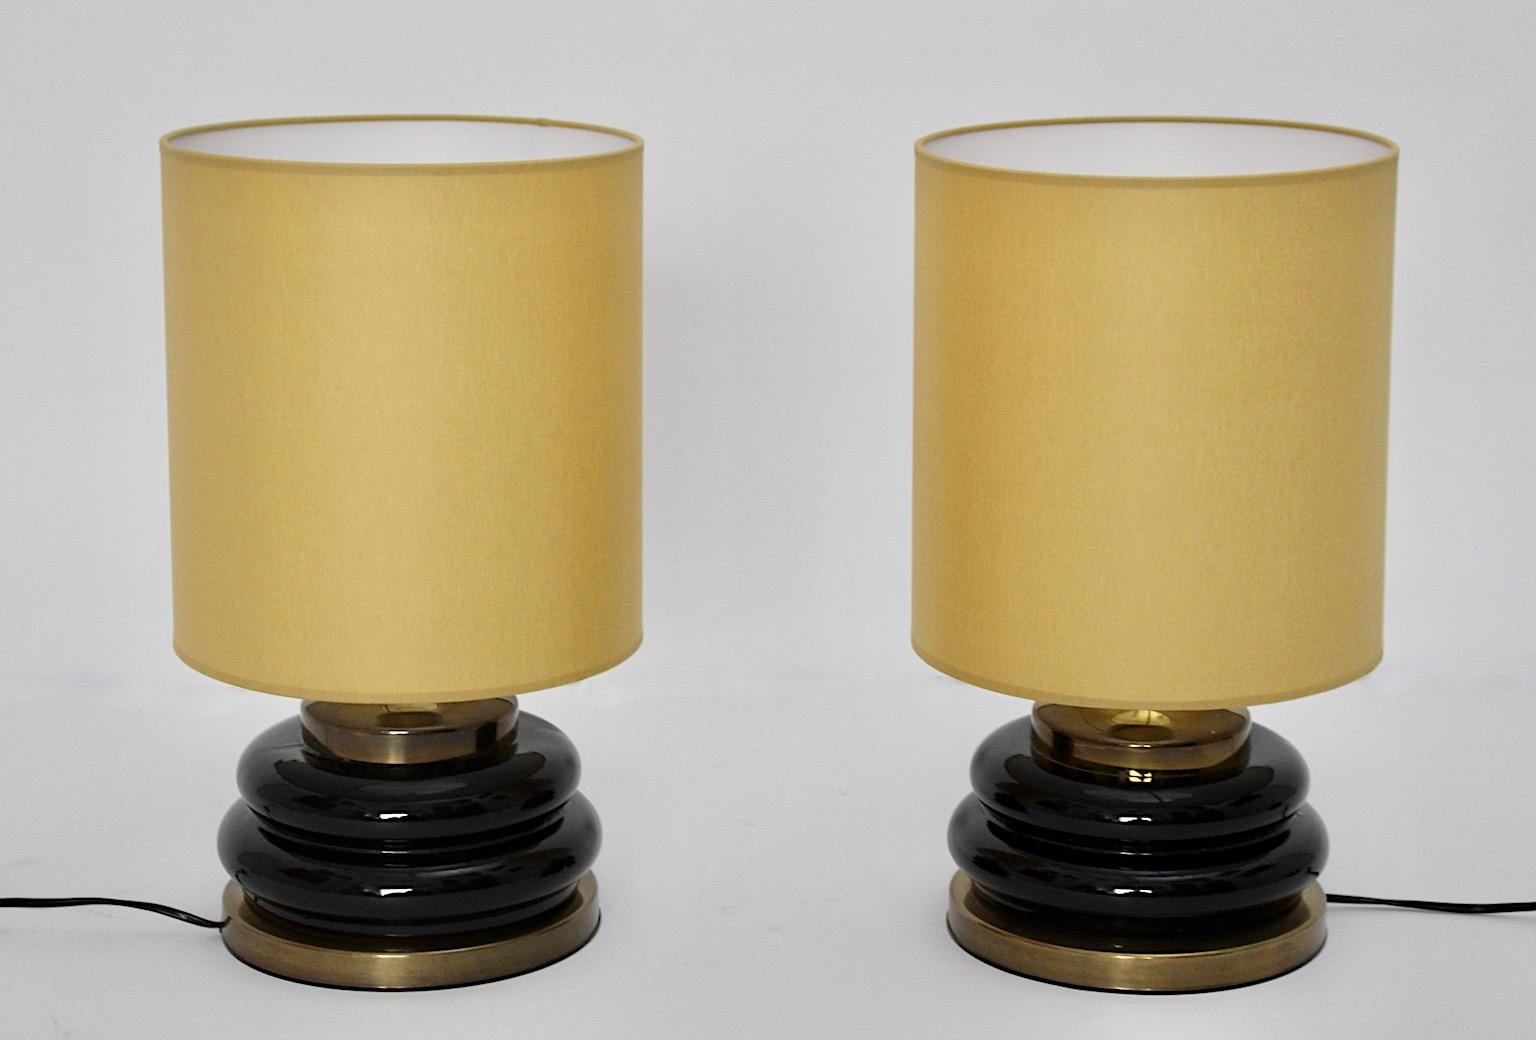 Italian Modernist Brown Gold Glass Vintage Table Lamps Pair Duo, 1970s, Italy For Sale